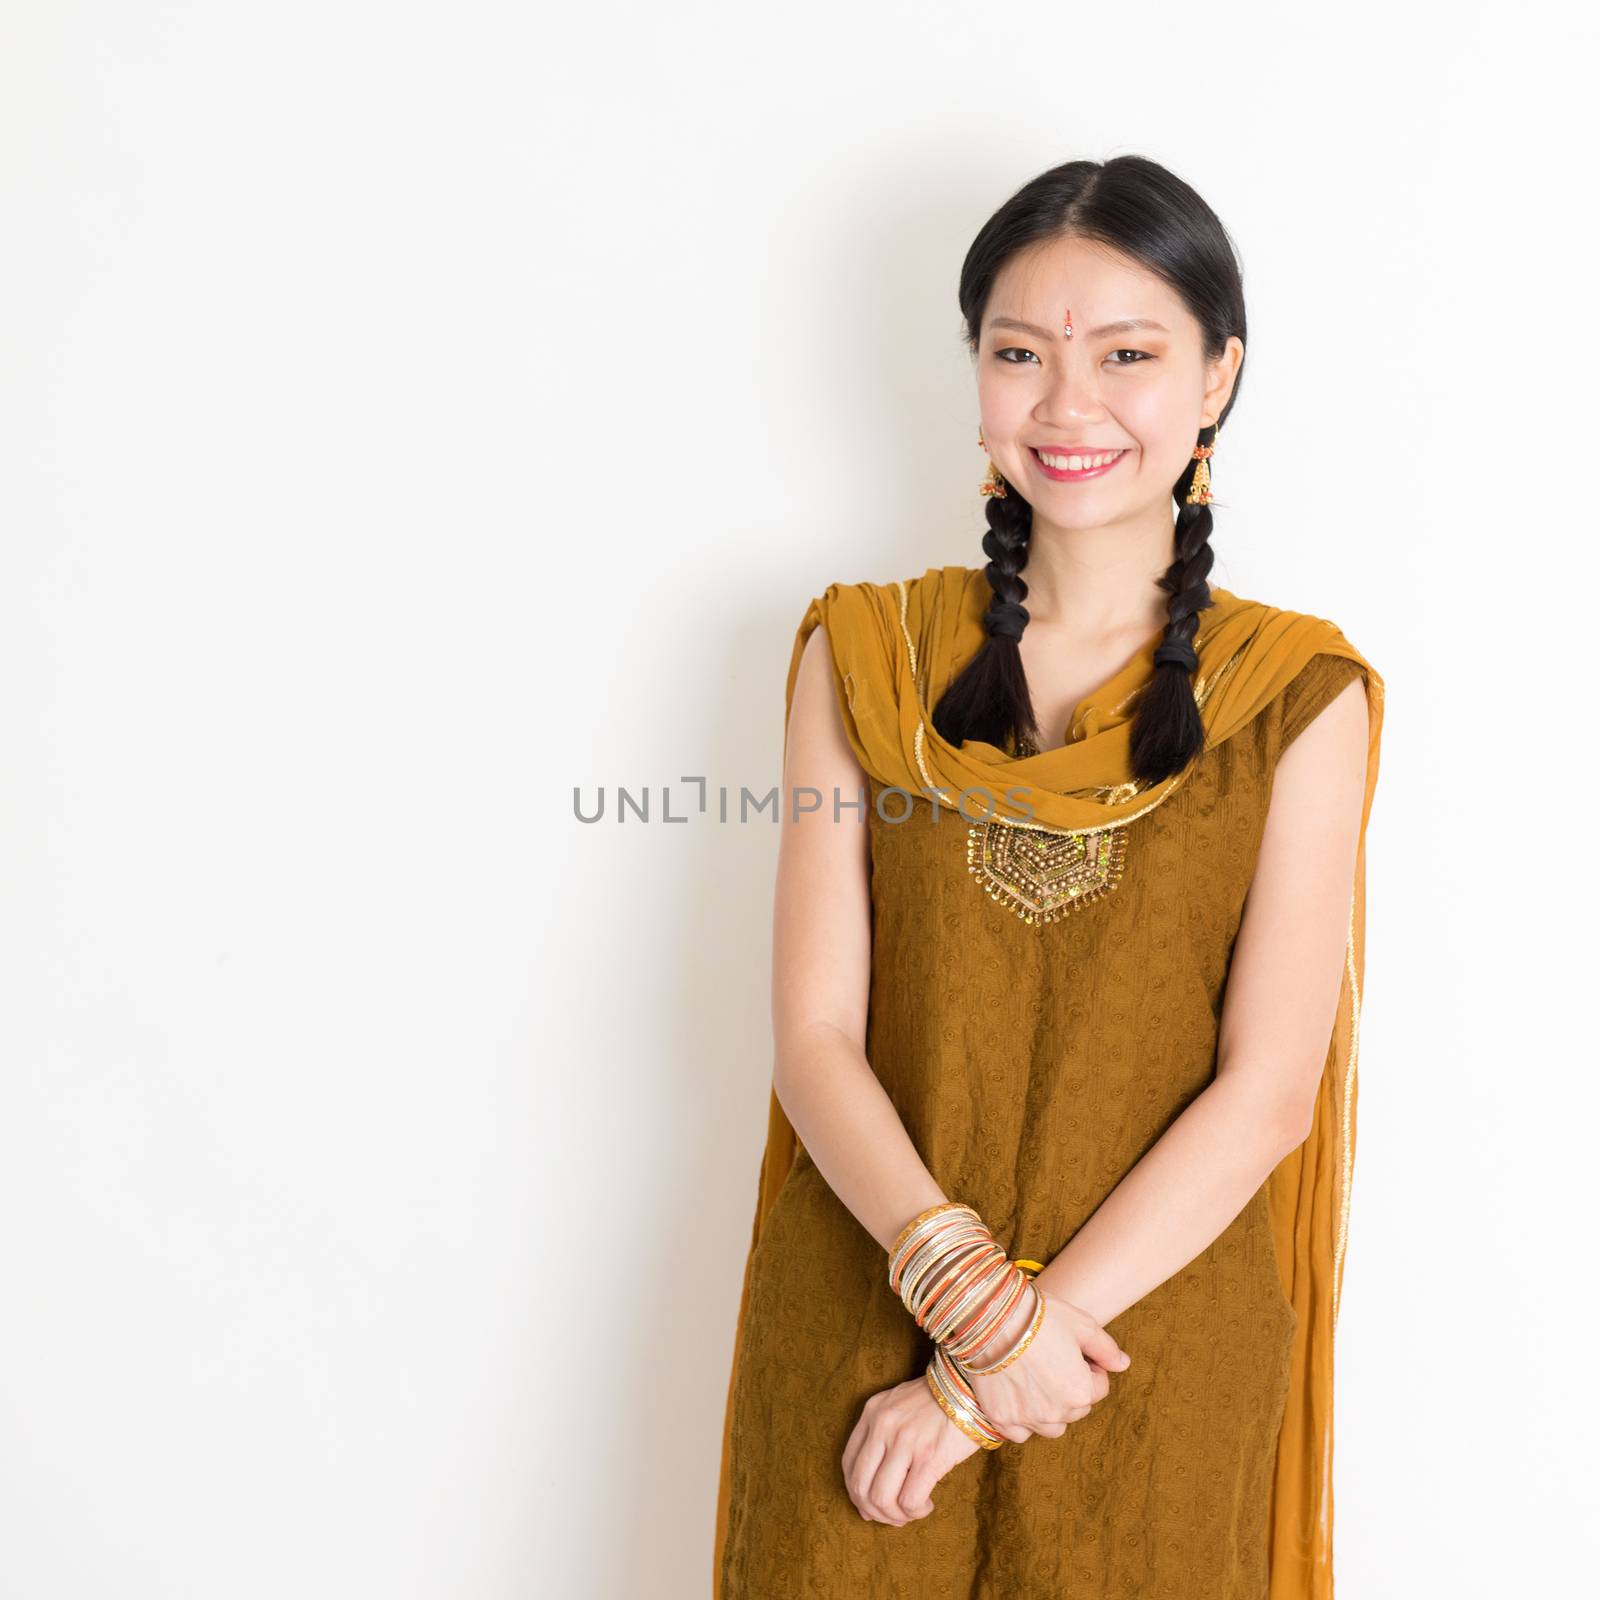 Portrait of young mixed race Indian Chinese girl in traditional Punjabi dress smiling, standing on plain white background.